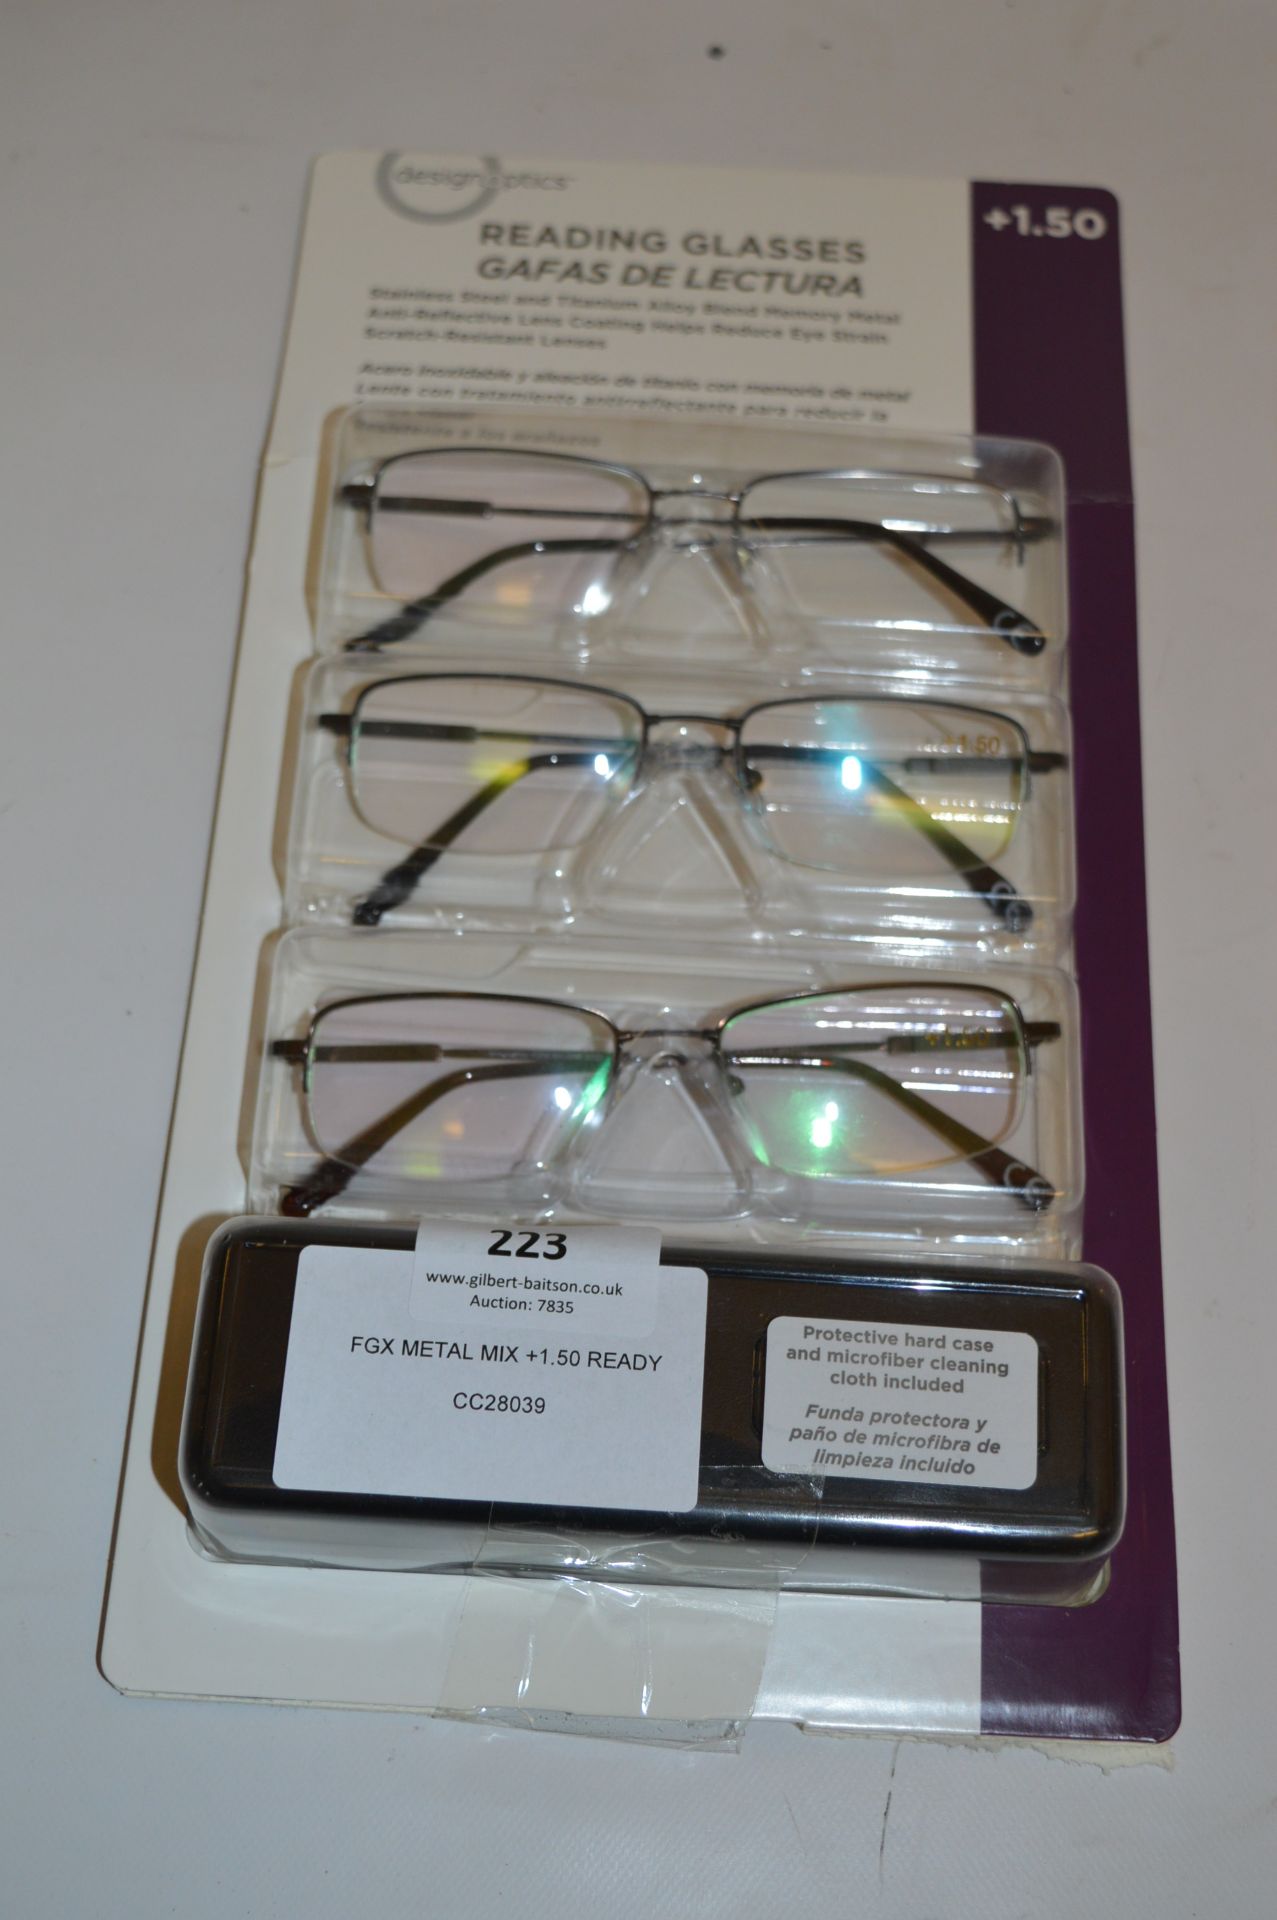 *FGX METAL MIX +1.50 READY READER GLASSES